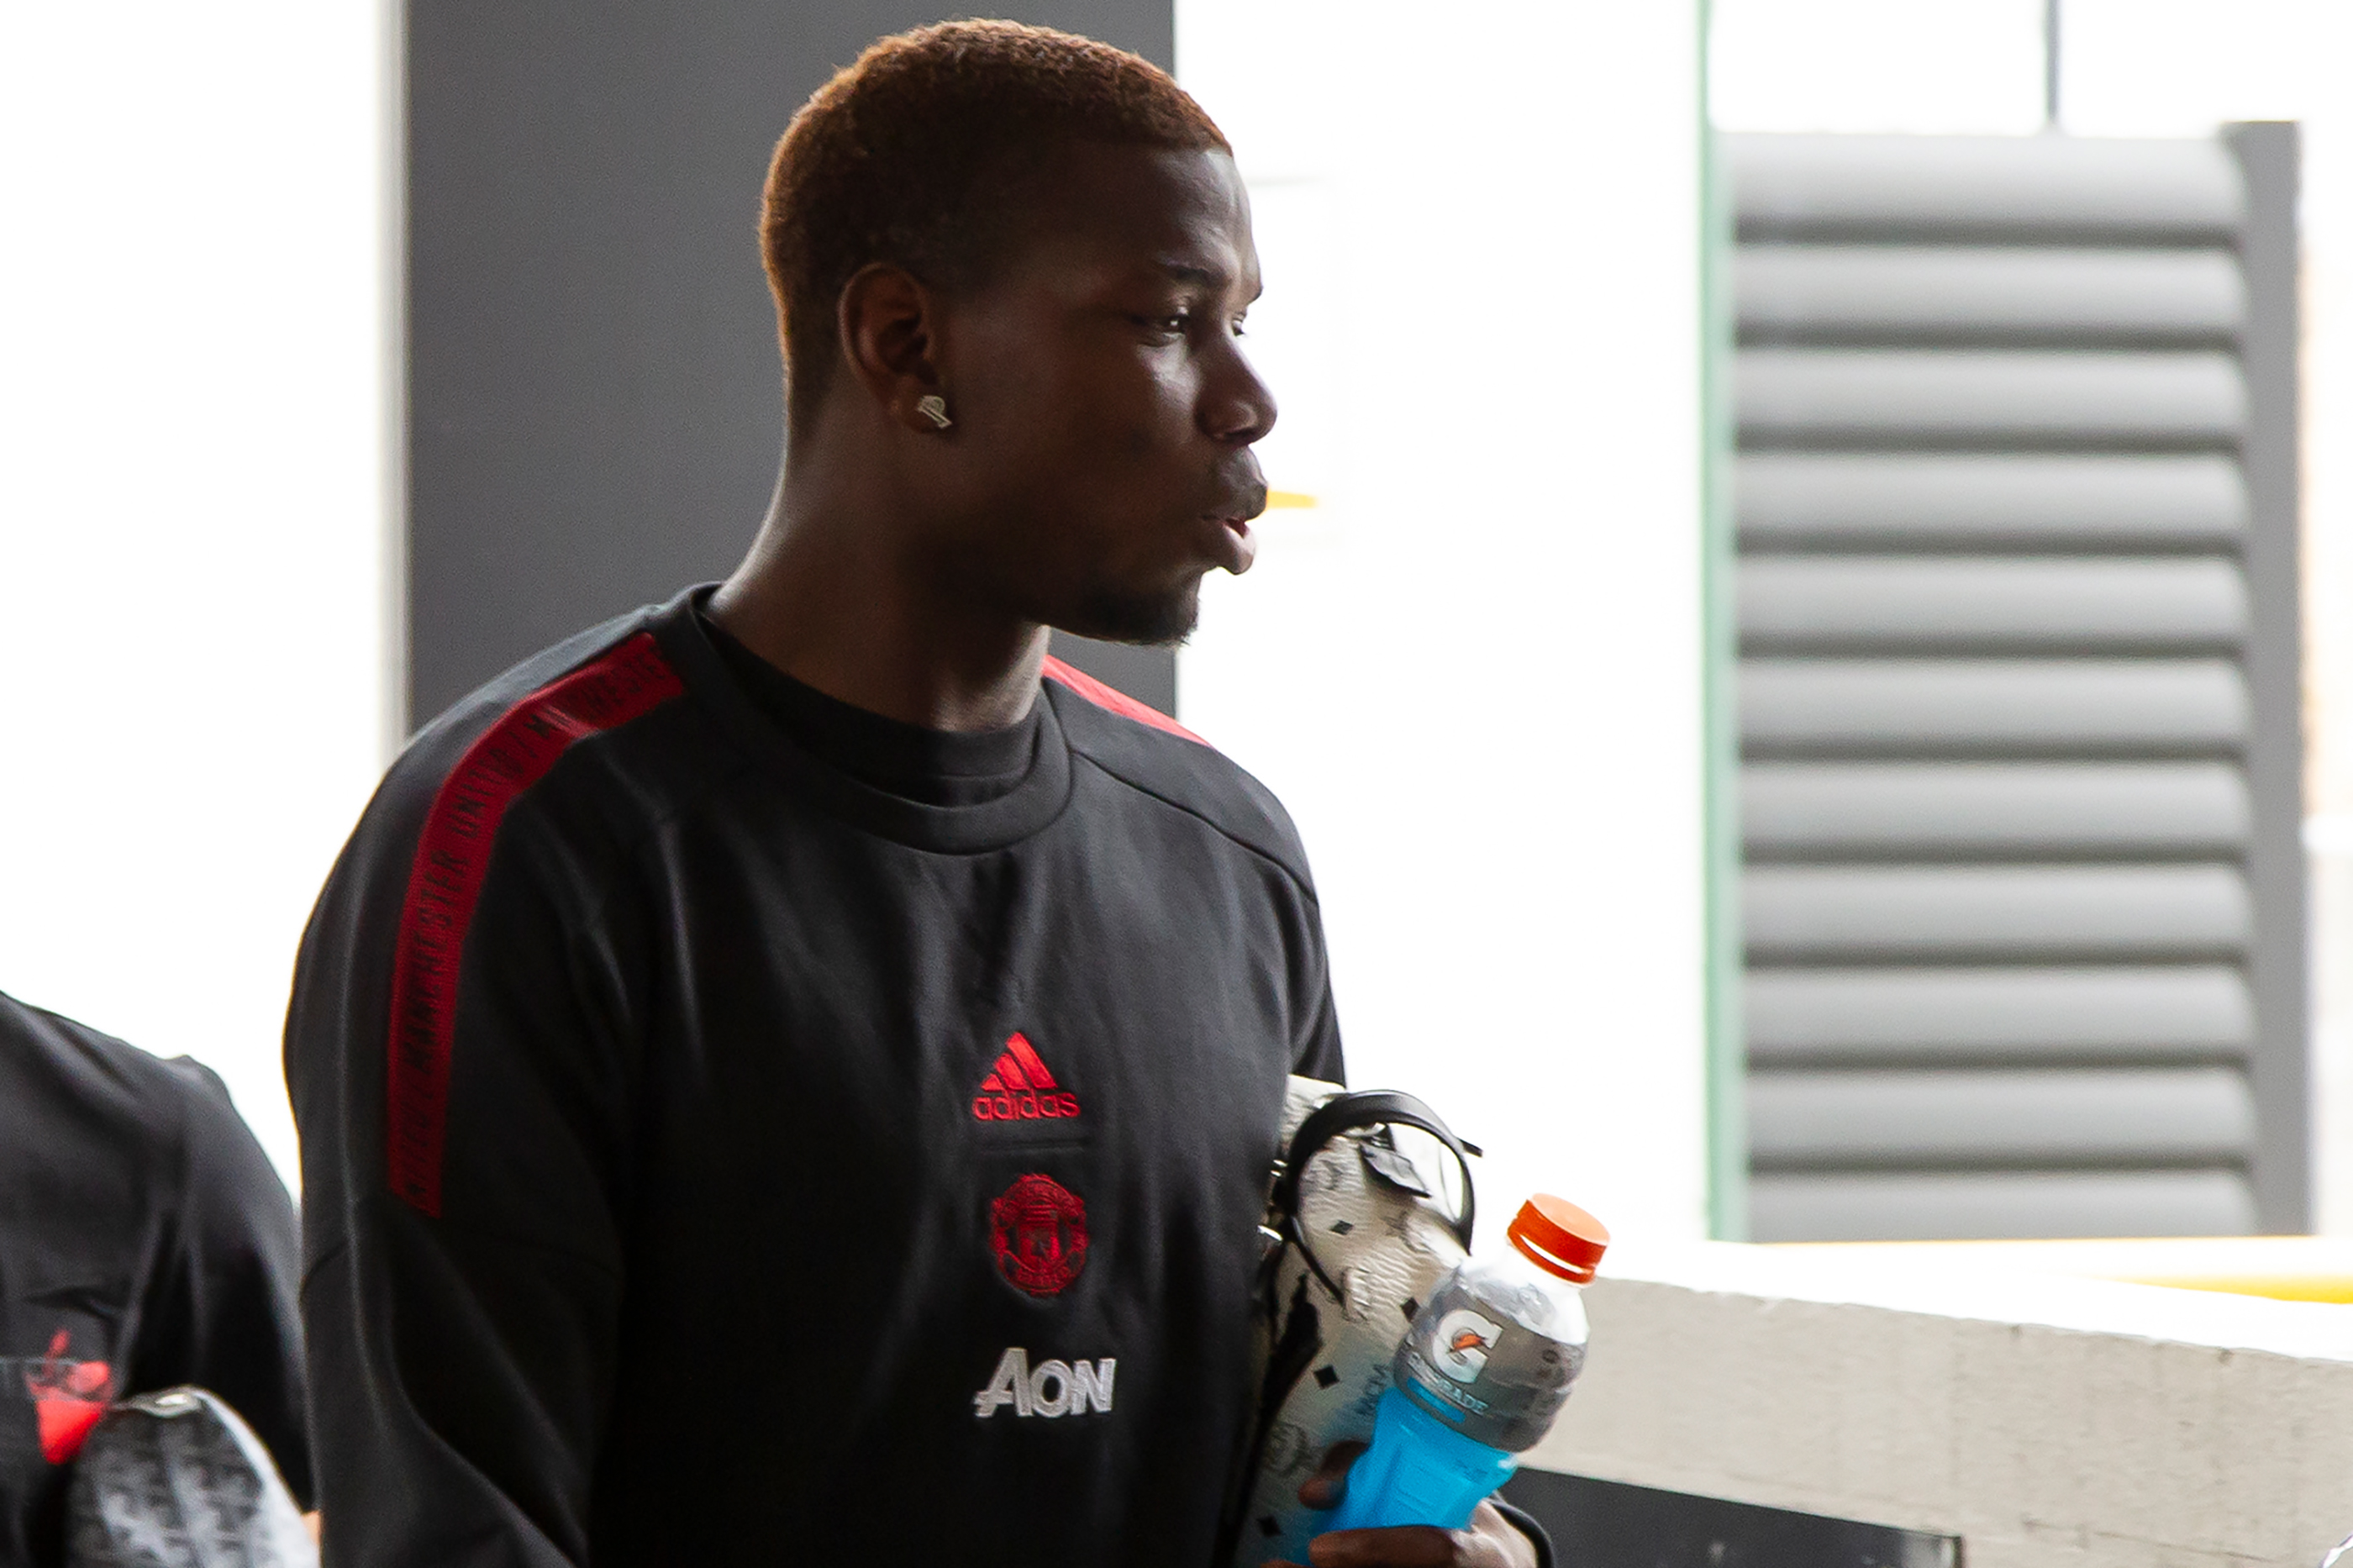 Manchester United's Paul Pogba leaves the pitch after training for their pre-season friendly football matches against Perth Glory and Leeds United at Optus Stadium in Perth on  July 10, 2019. (Photo by Tony ASHBY / AFP) / -- IMAGE RESTRICTED TO EDITORIAL USE - STRICTLY NO COMMERCIAL USE --        (Photo credit should read TONY ASHBY/AFP/Getty Images)